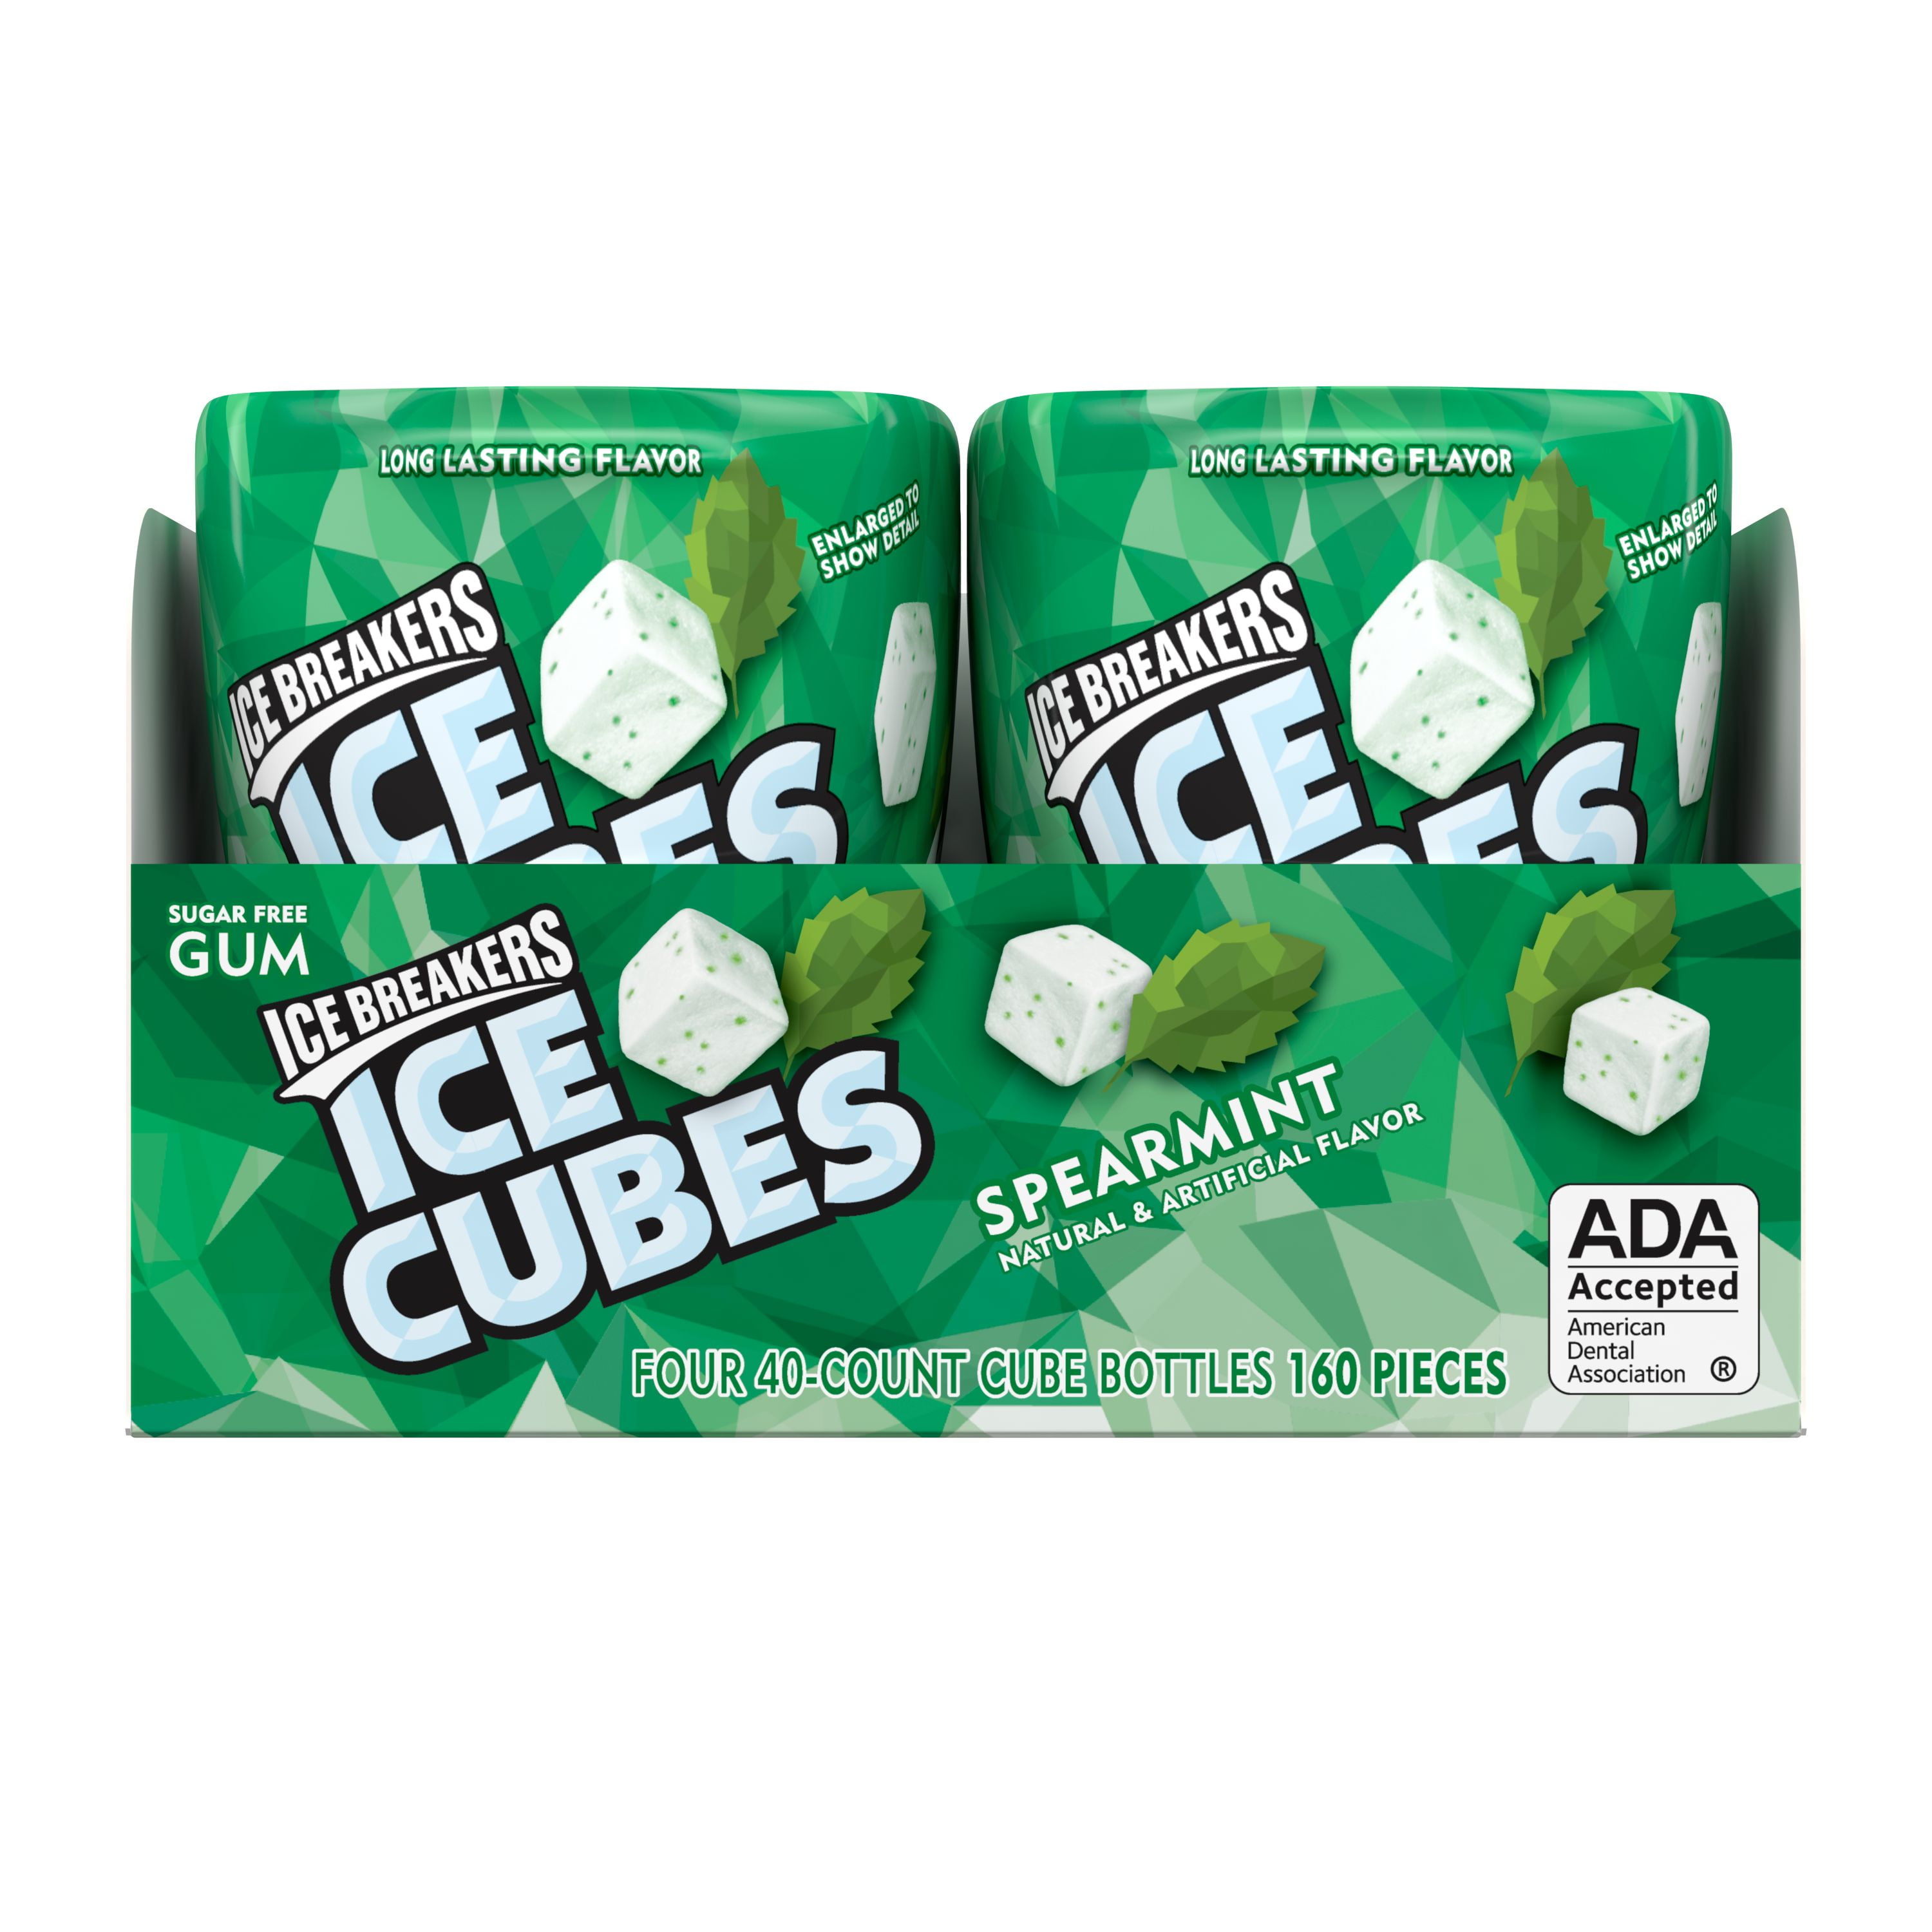 Ice Breakers Ice Cubes Spearmint Flavored Sugar Free Chewing Gum